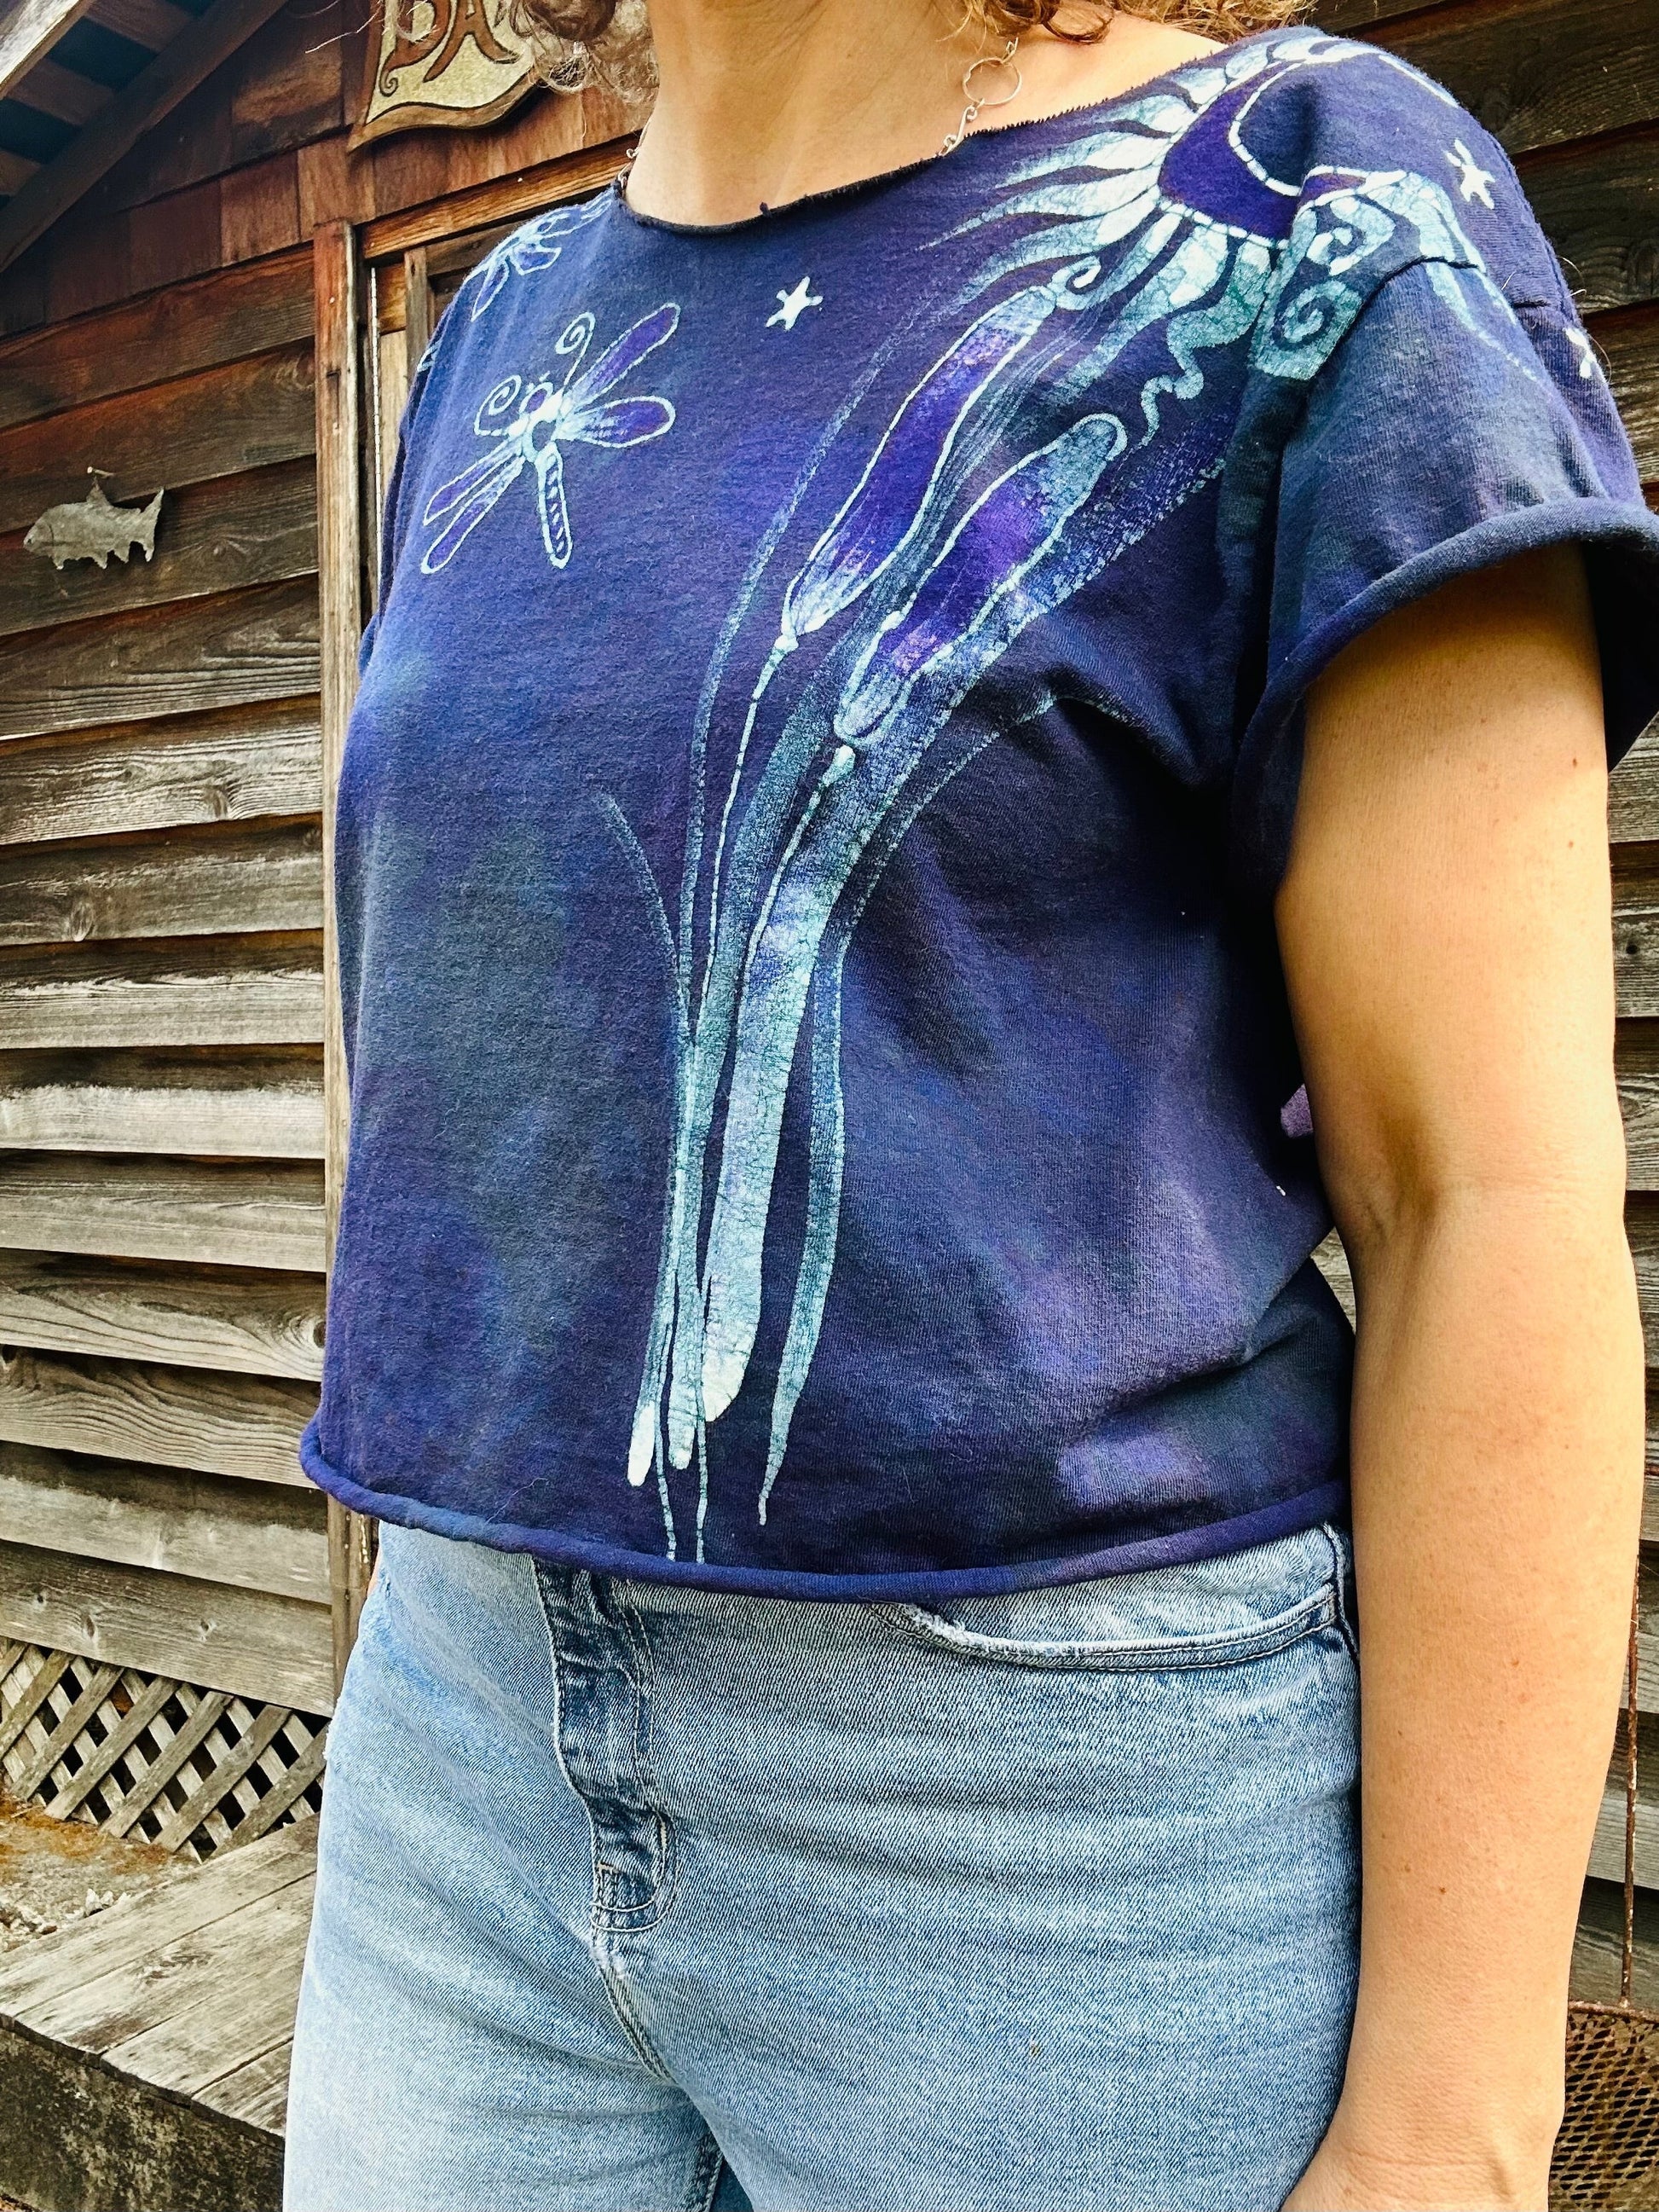 Dragonfly and Cattails Cotton Cut Cropped Tee Shirts & Tops Batikwalla by Victoria 